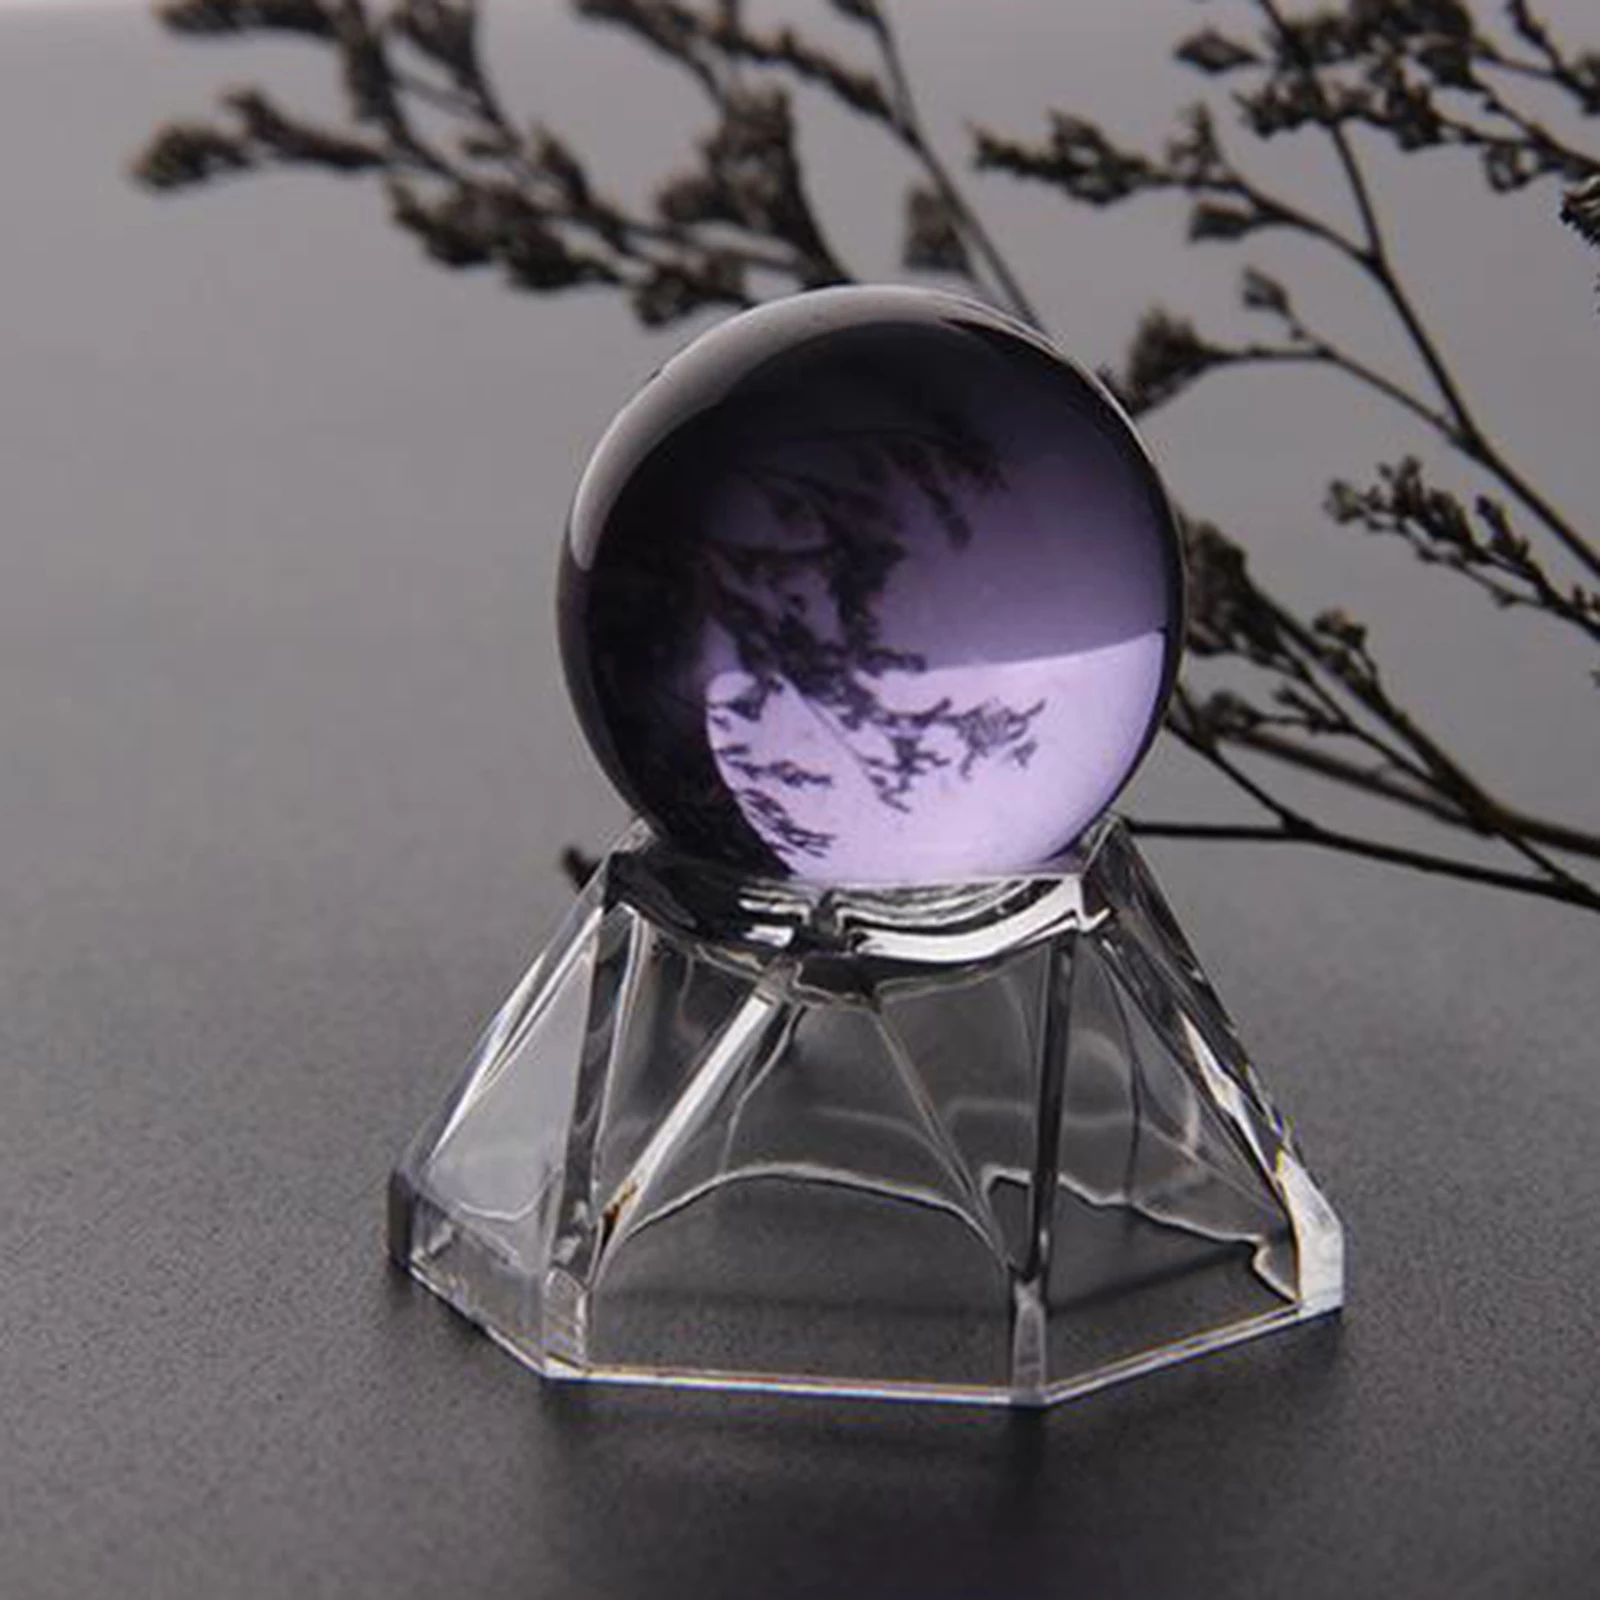 Acrylic Display Stand For Crystal Ball Marbles Sphere Transparent Pedestal